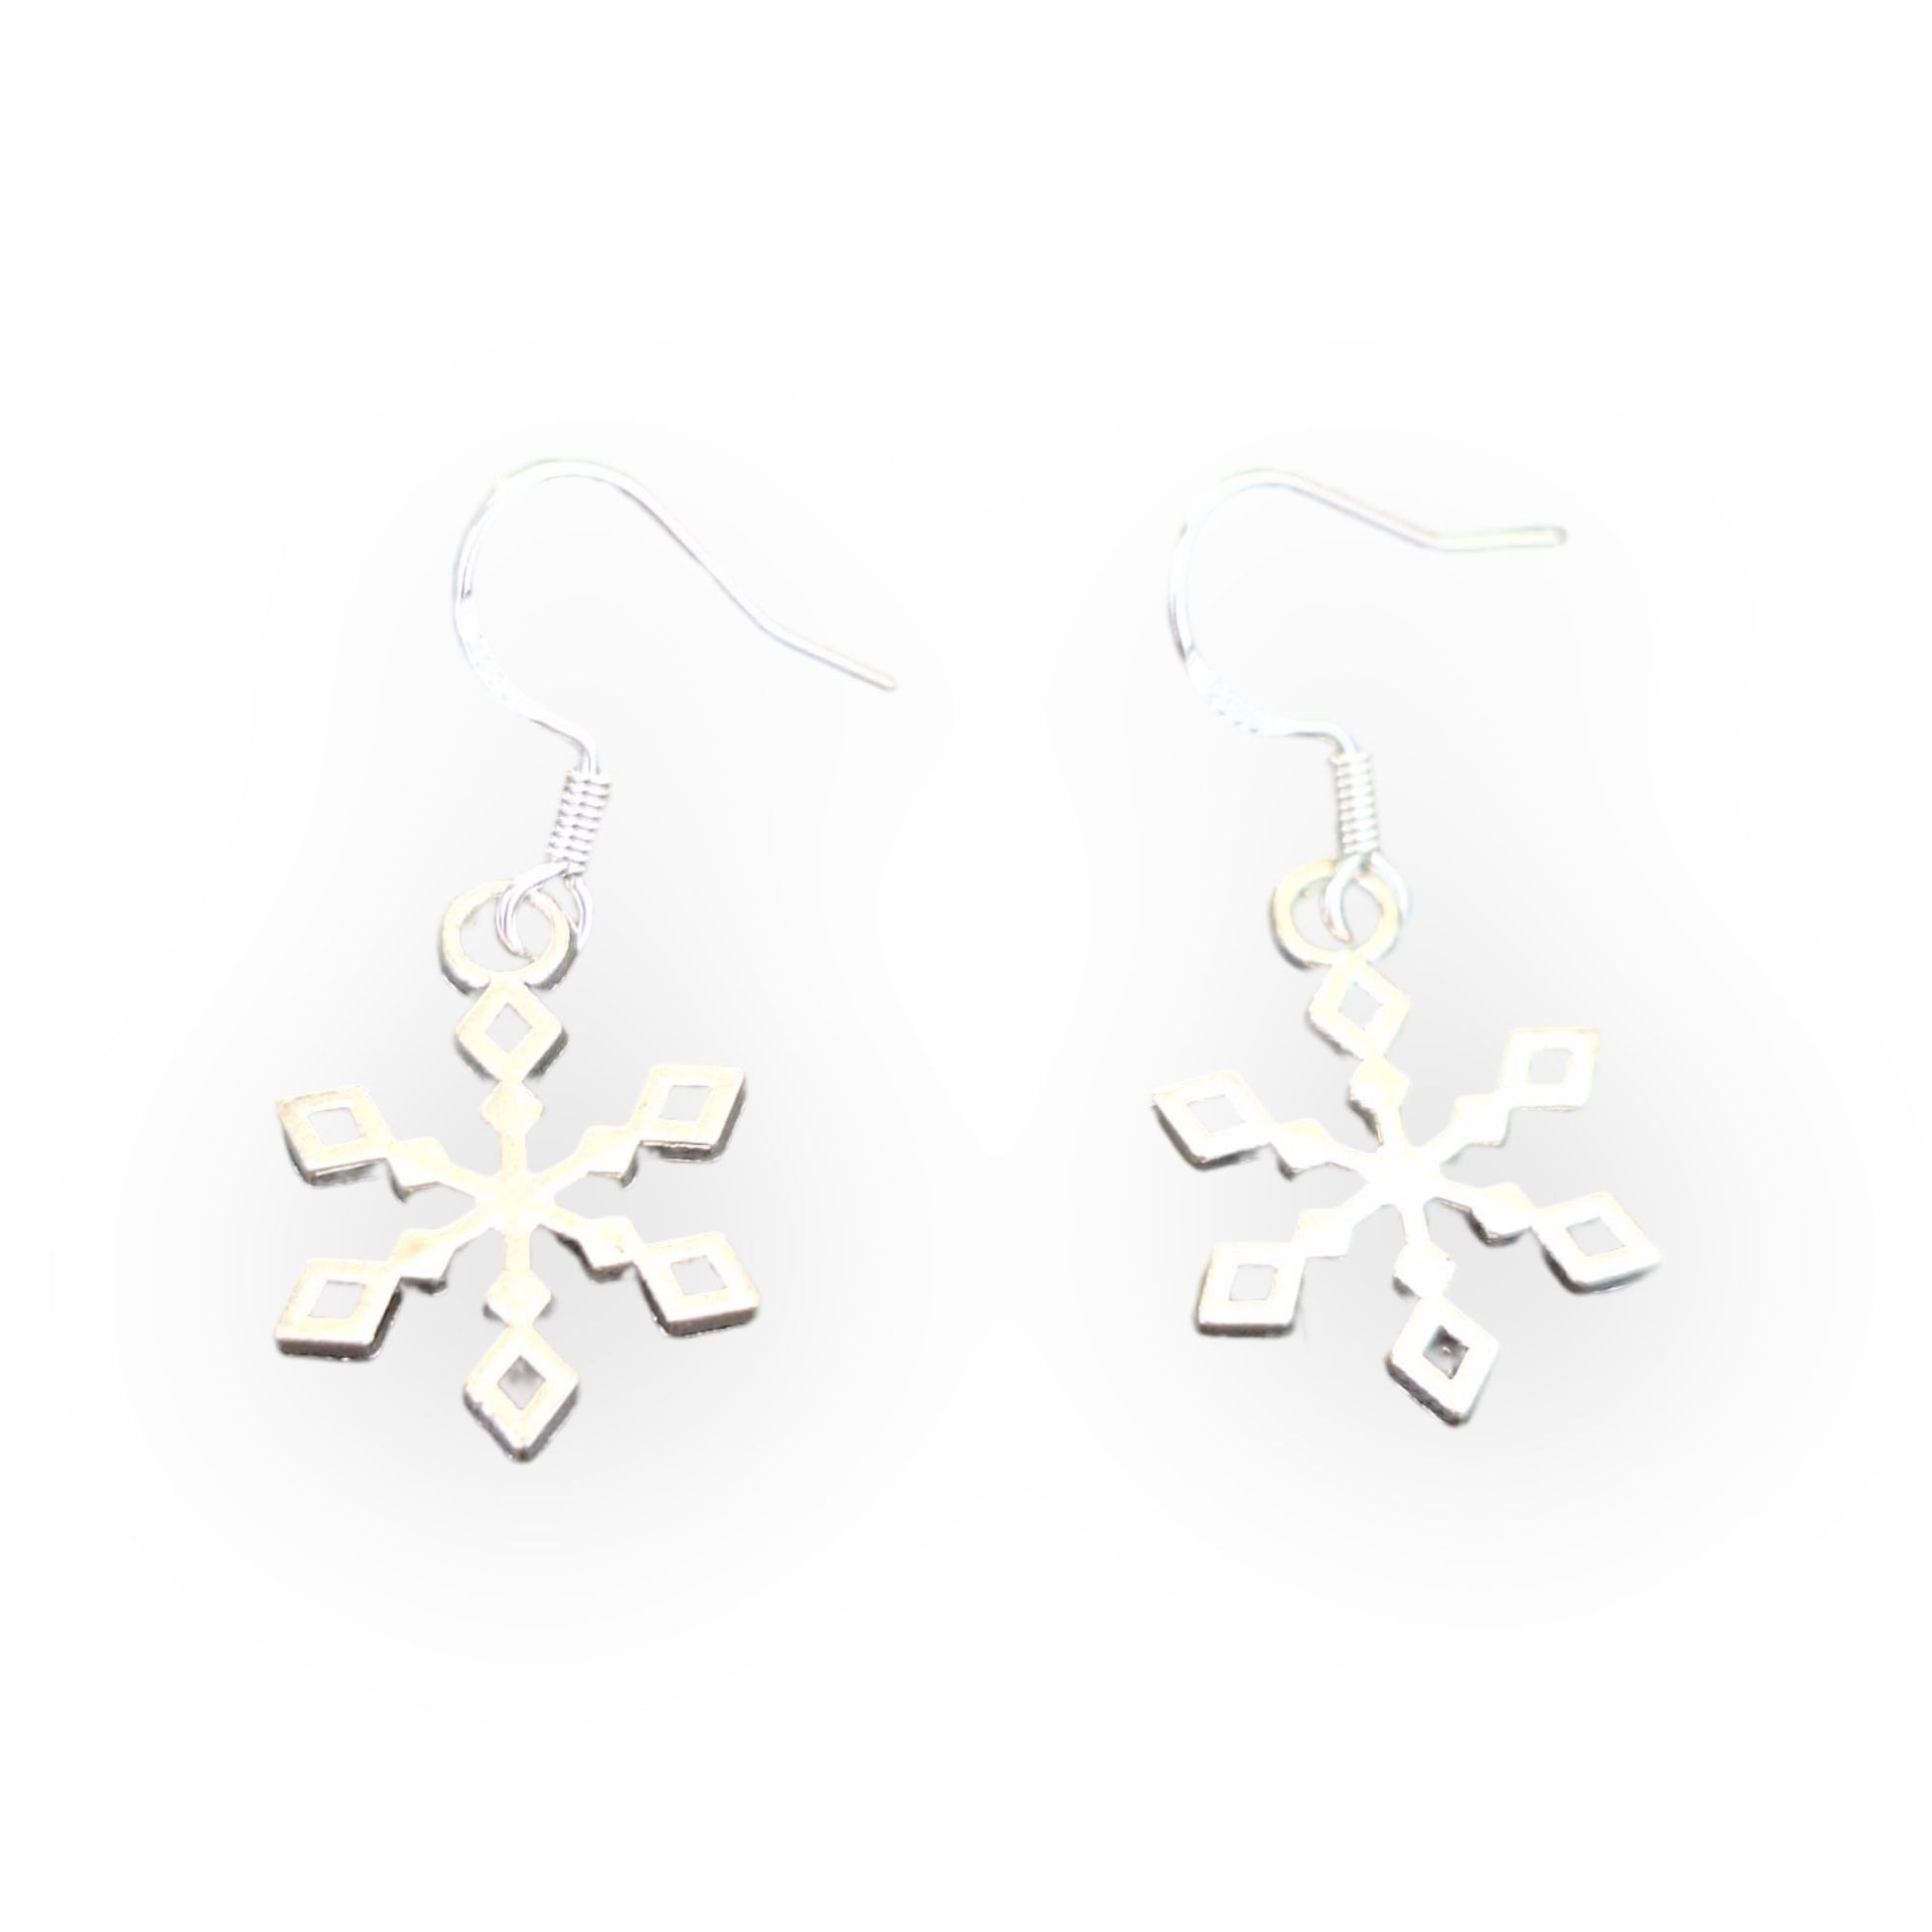 Antique Silver Snowflake Dangly Charm Earrings In Gift Bag, Winter, Christmas, Gifts For Her - Premium  from Etsy - Just £4.99! Shop now at Uniquely Holt